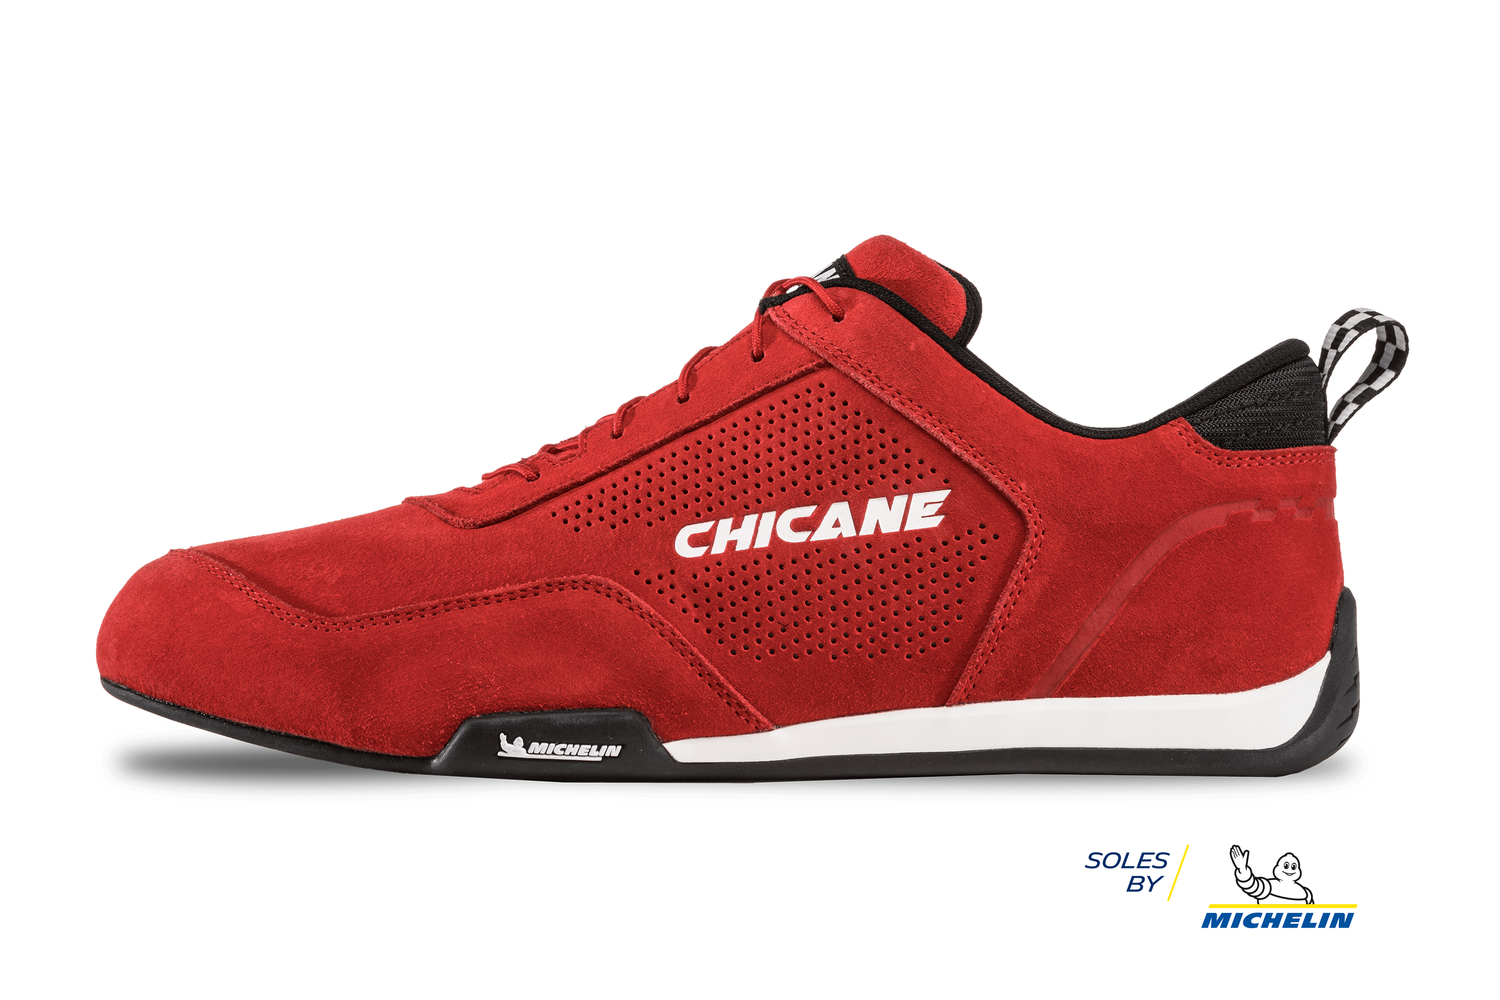 Chicane The Sole of Racing Motorsports Footwear Auto Racing Shoes Track Life Car Shoes